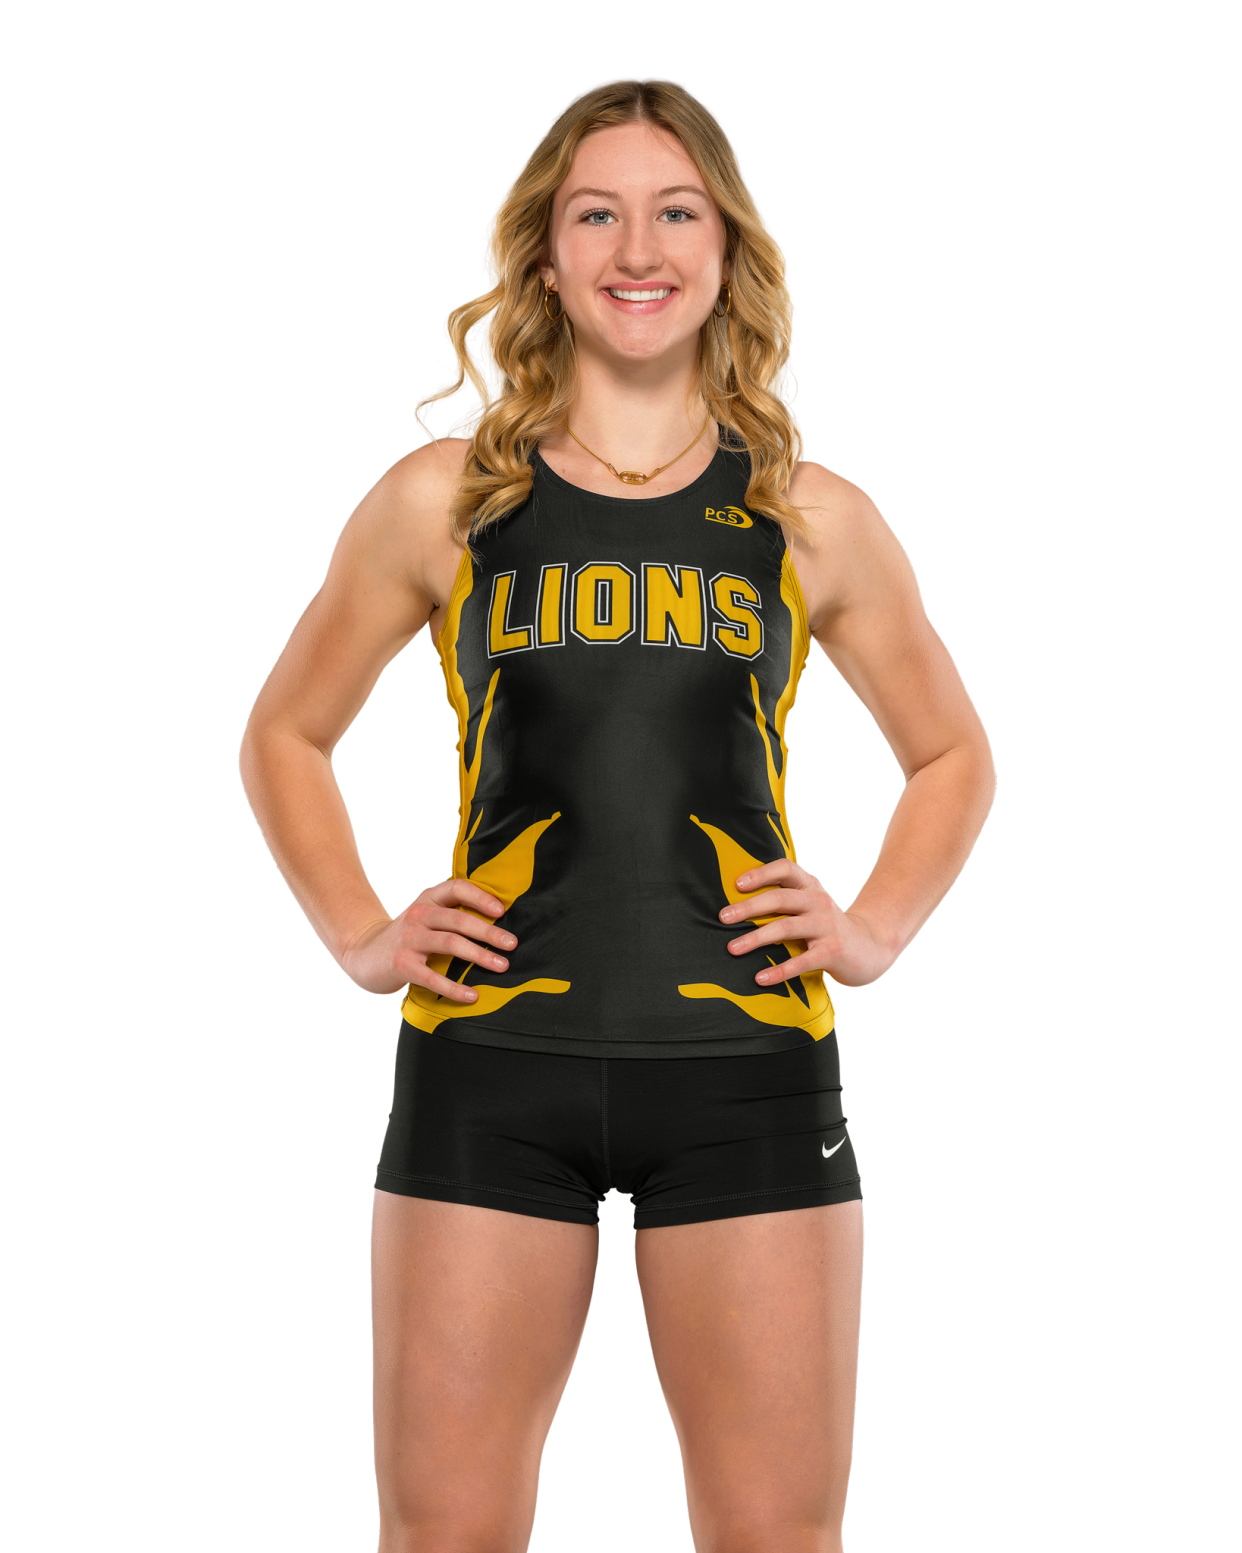 Clear Lake girls track and field athlete Reese Brownlee was voted the Des Moines Register's female Athlete of the Week for the week of April 8-14.